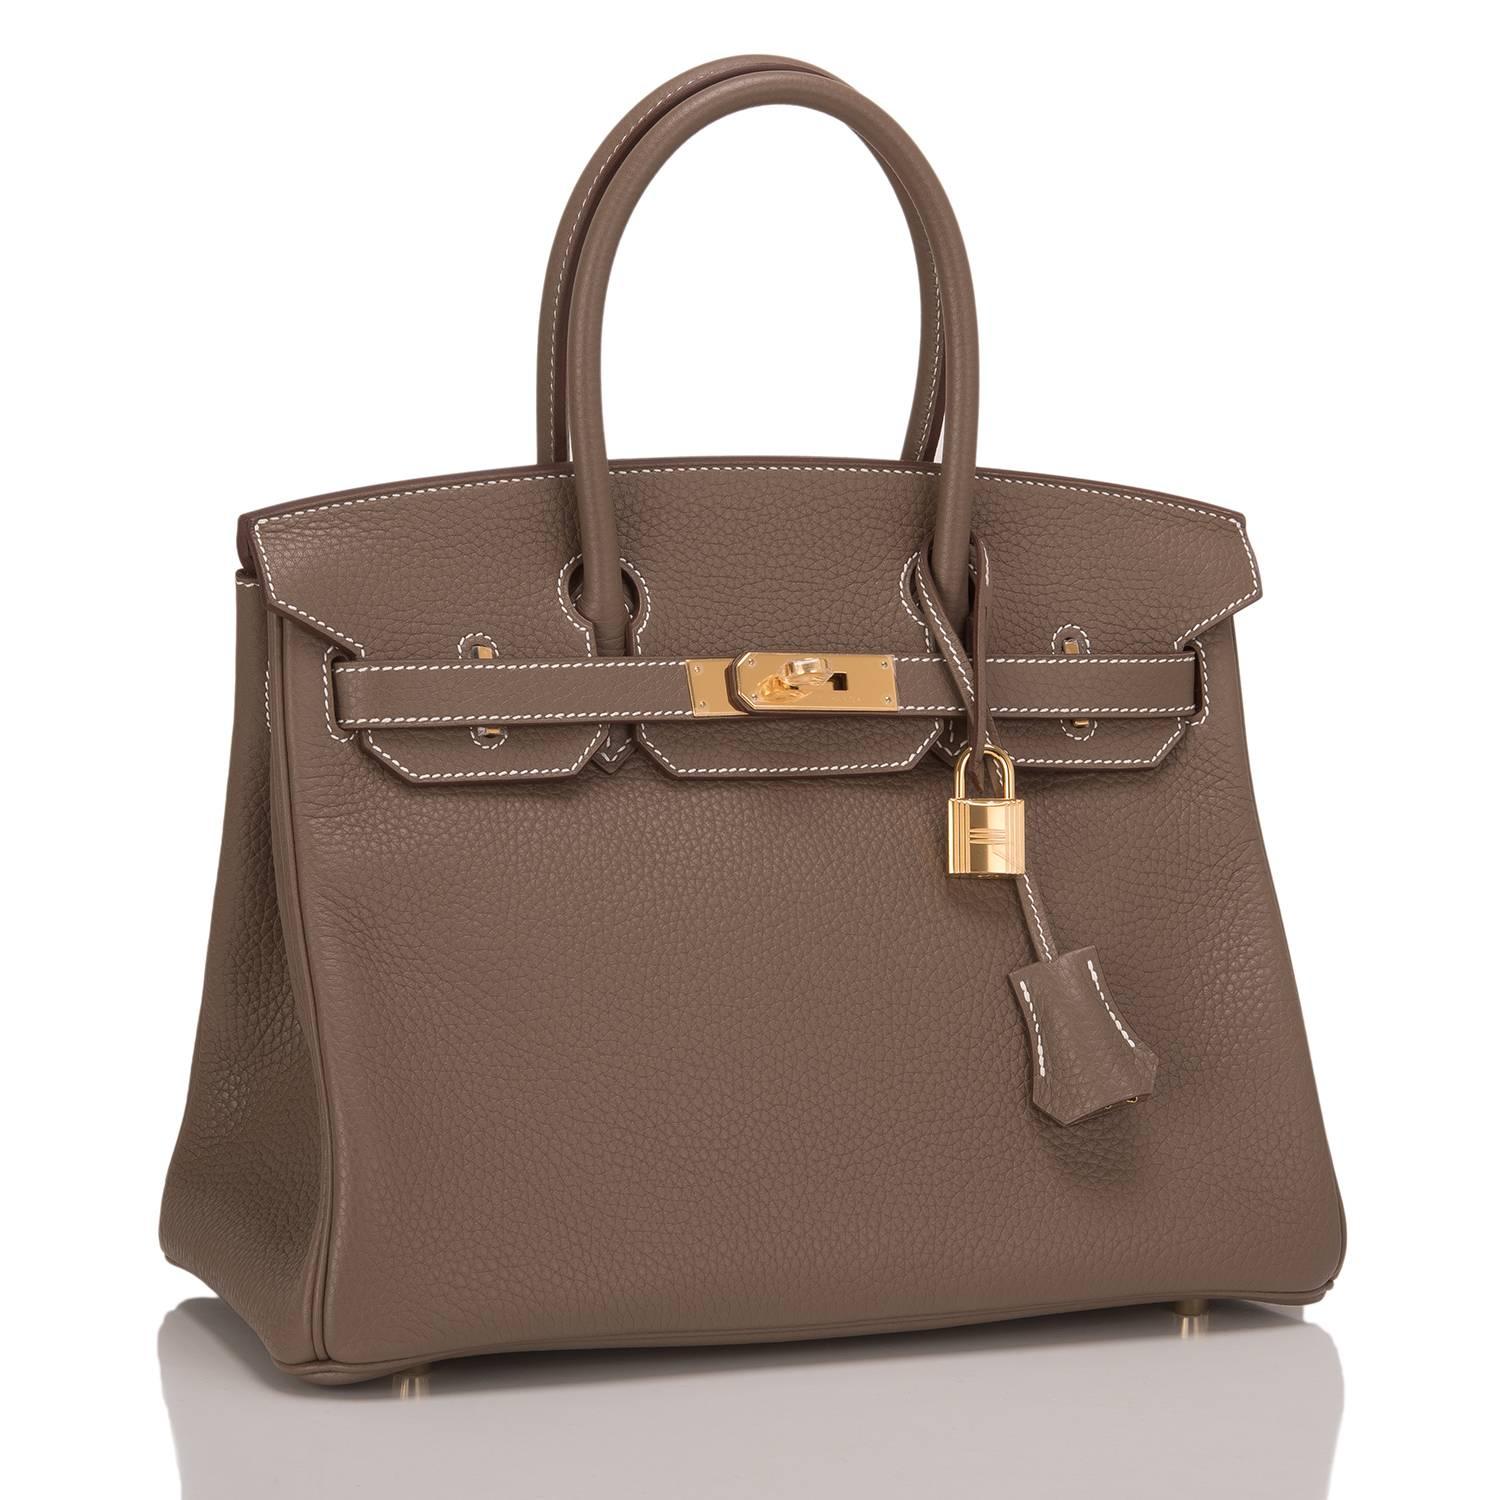 Hermes Etoupe 30cm in clemence leather with gold hardware.

This Birkin features tonal stitching, front toggle closure, clochette with lock and two keys, and double rolled handles. The interior is lined in Etoupe chevre with one zip pocket with an